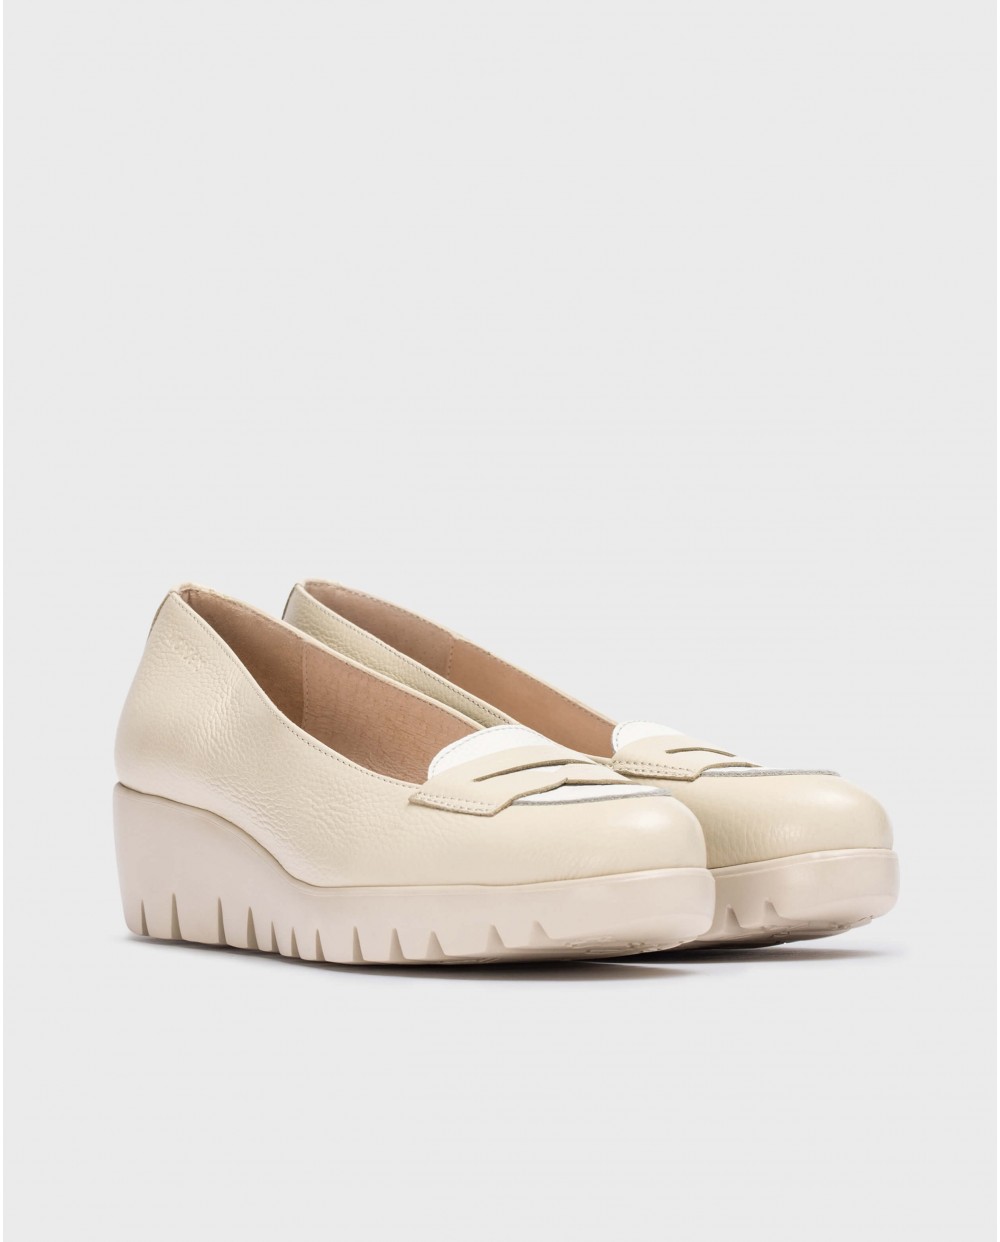 Wonders-Loafers-Cream Moccasin